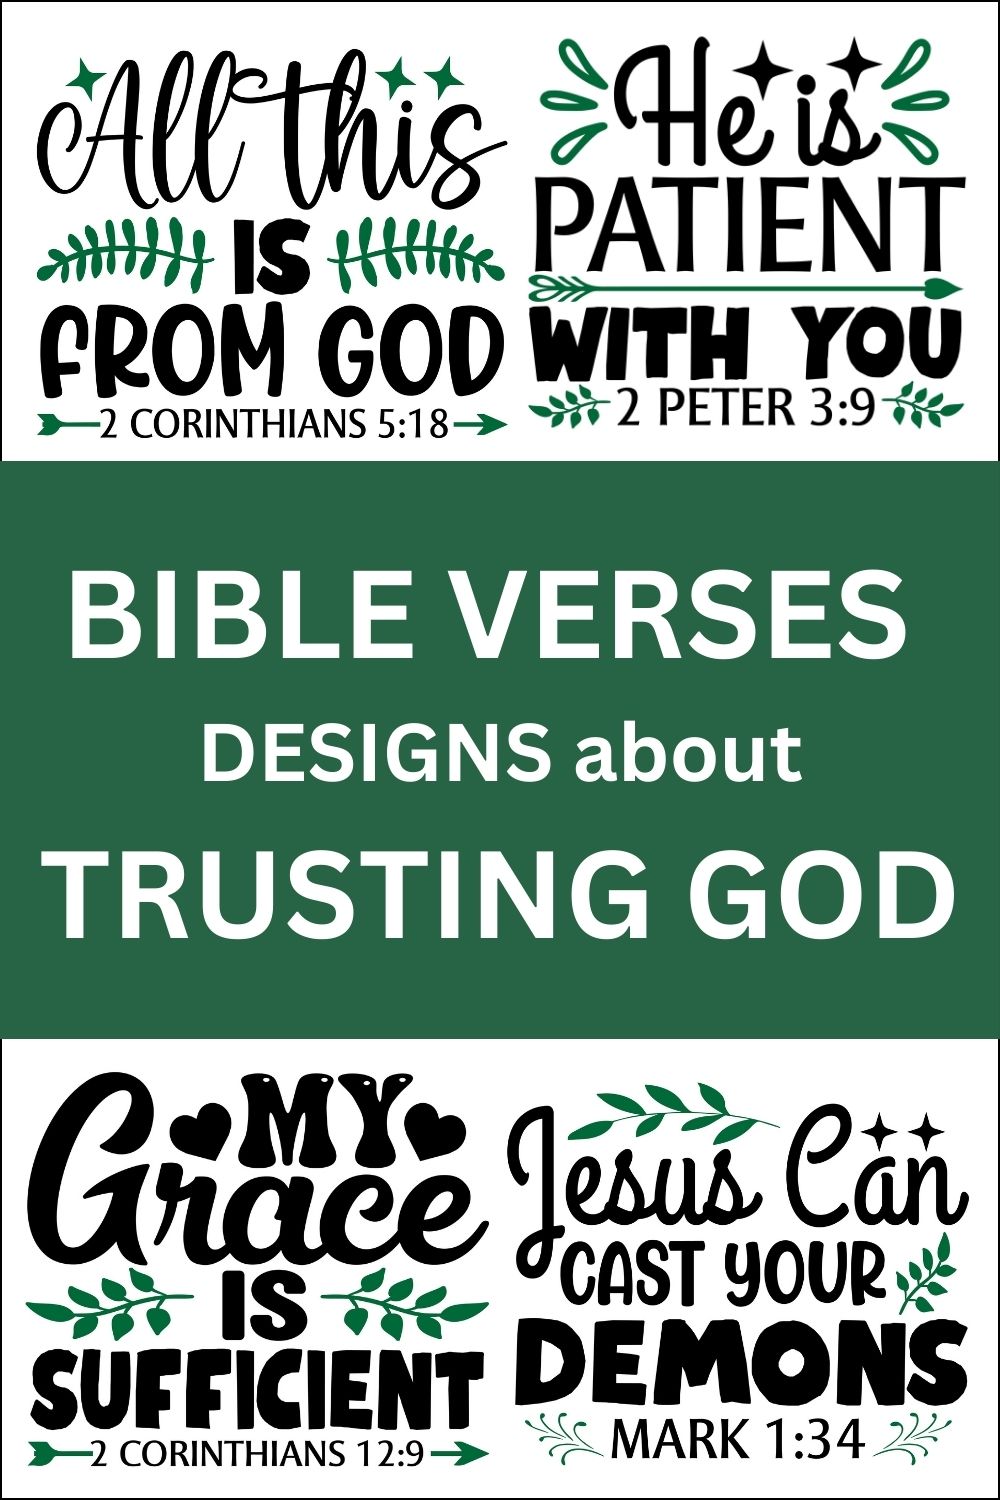 Free printable bundle of Bible Verses about Trusting God, scripture passages, Cricut designs, DIY patterns, svg files, templates, clip art, stencils, silhouette, embroidery, cut files, design space, vector, crafts, laser cutting, and DIY crafts.